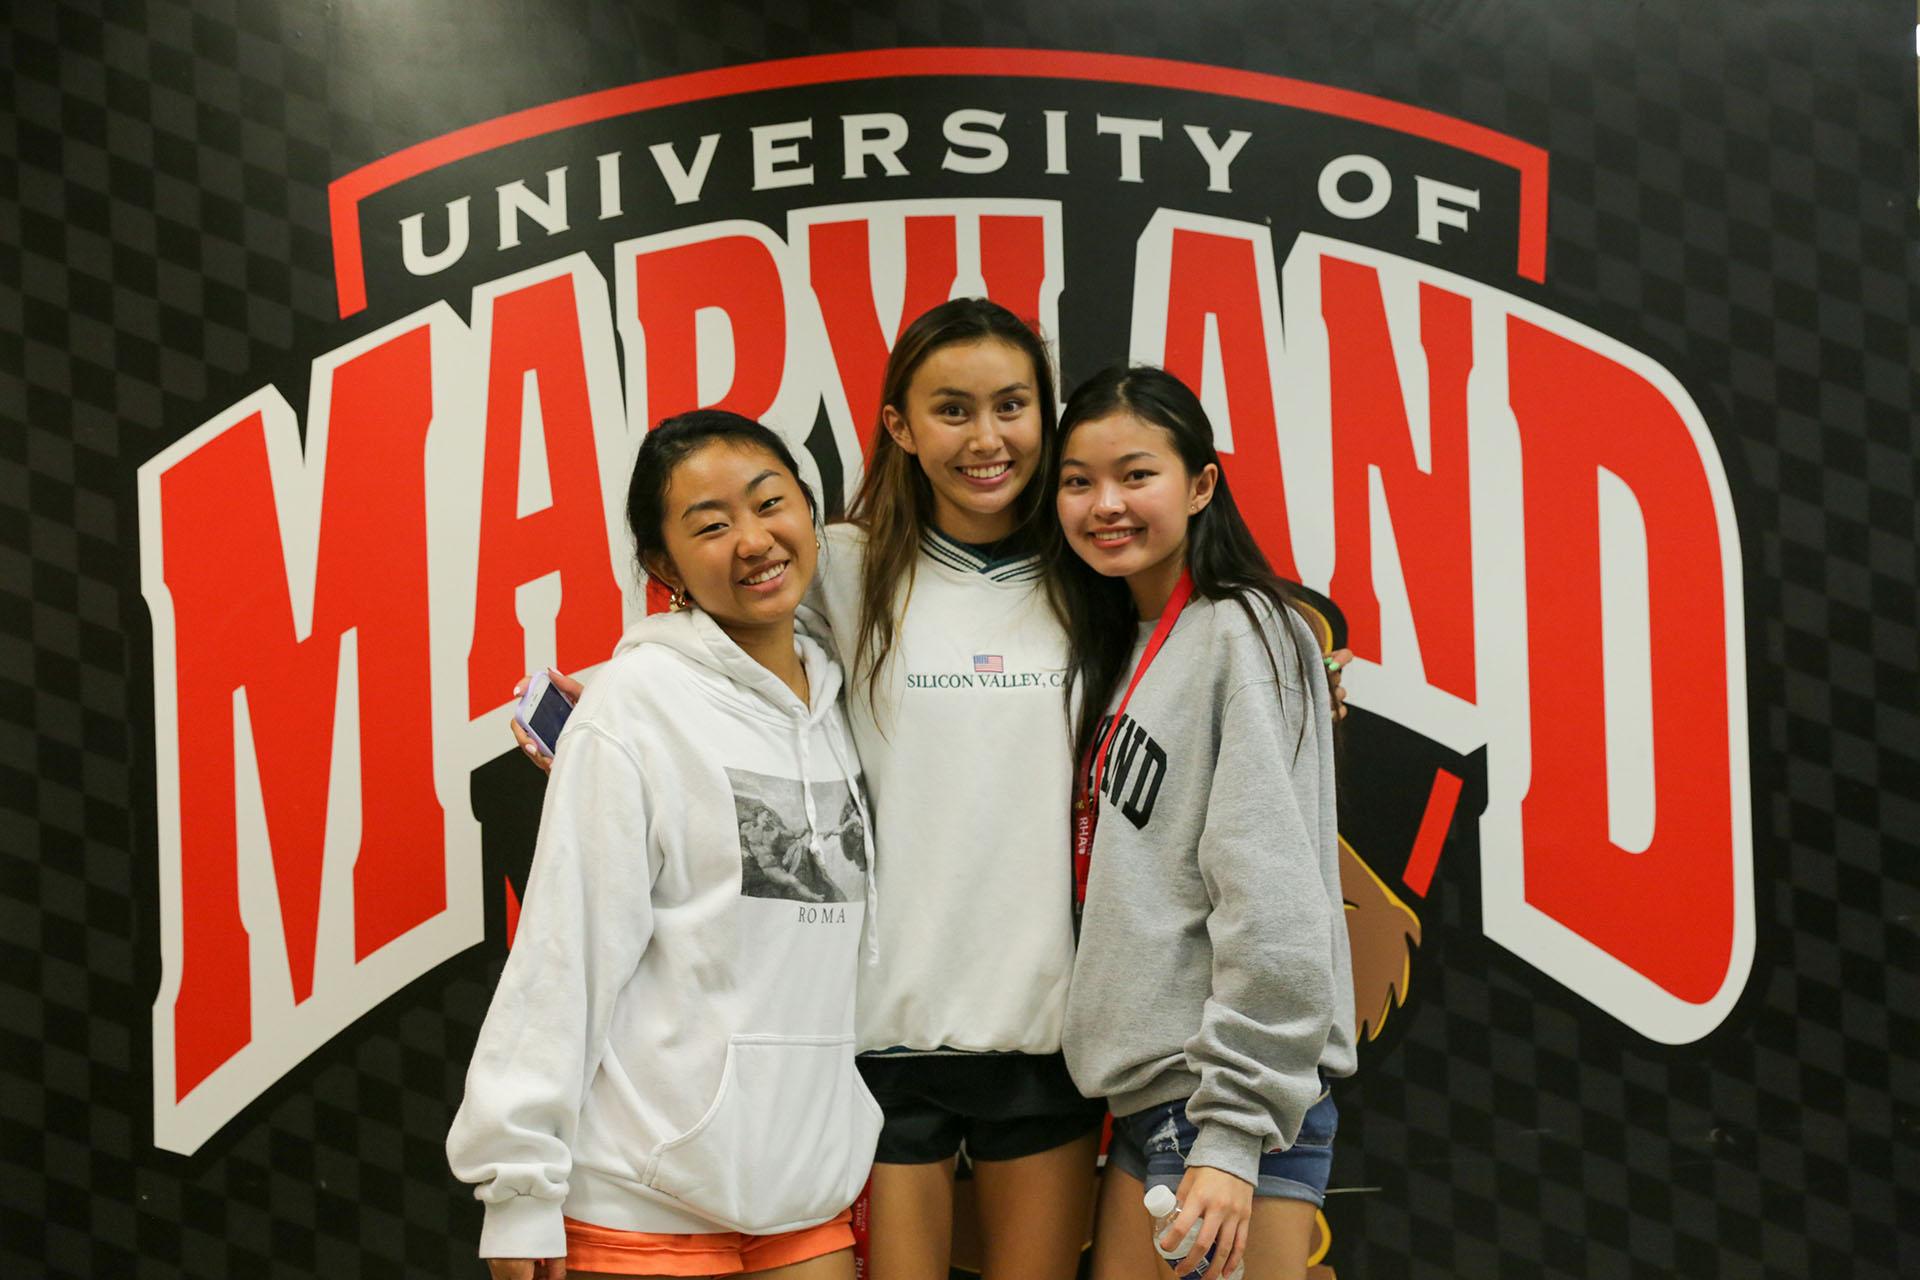 three students posing in front of wall that says University of Maryland